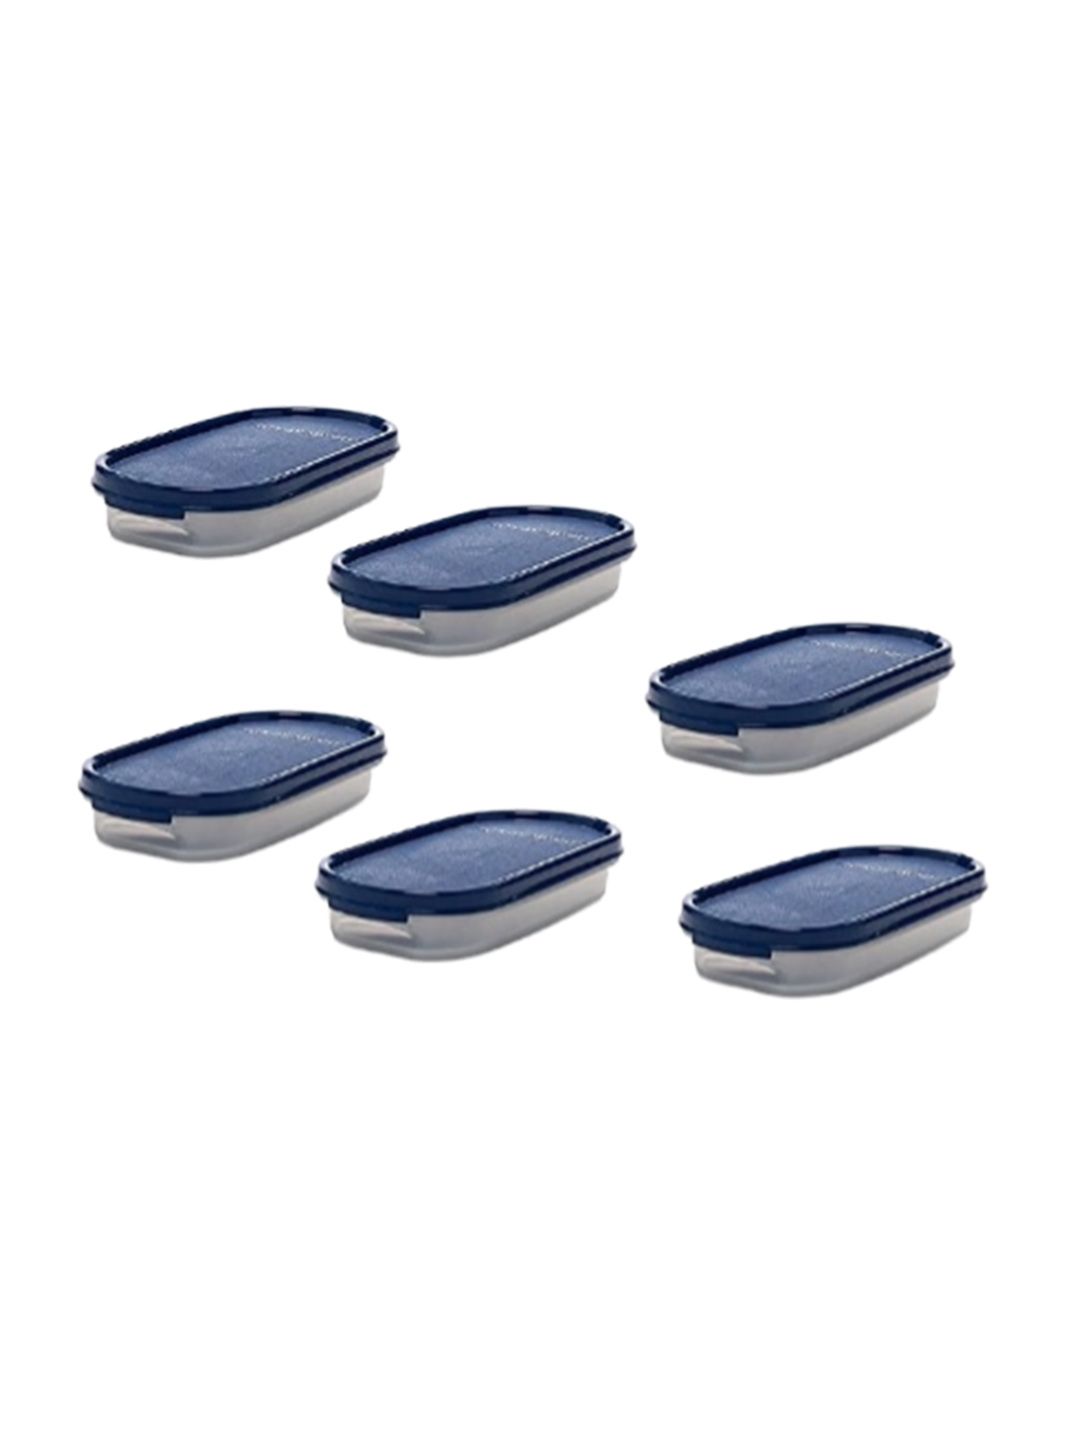 SignoraWare Set of 6 Blue & Transparent Solid Oval Food Containers Price in India